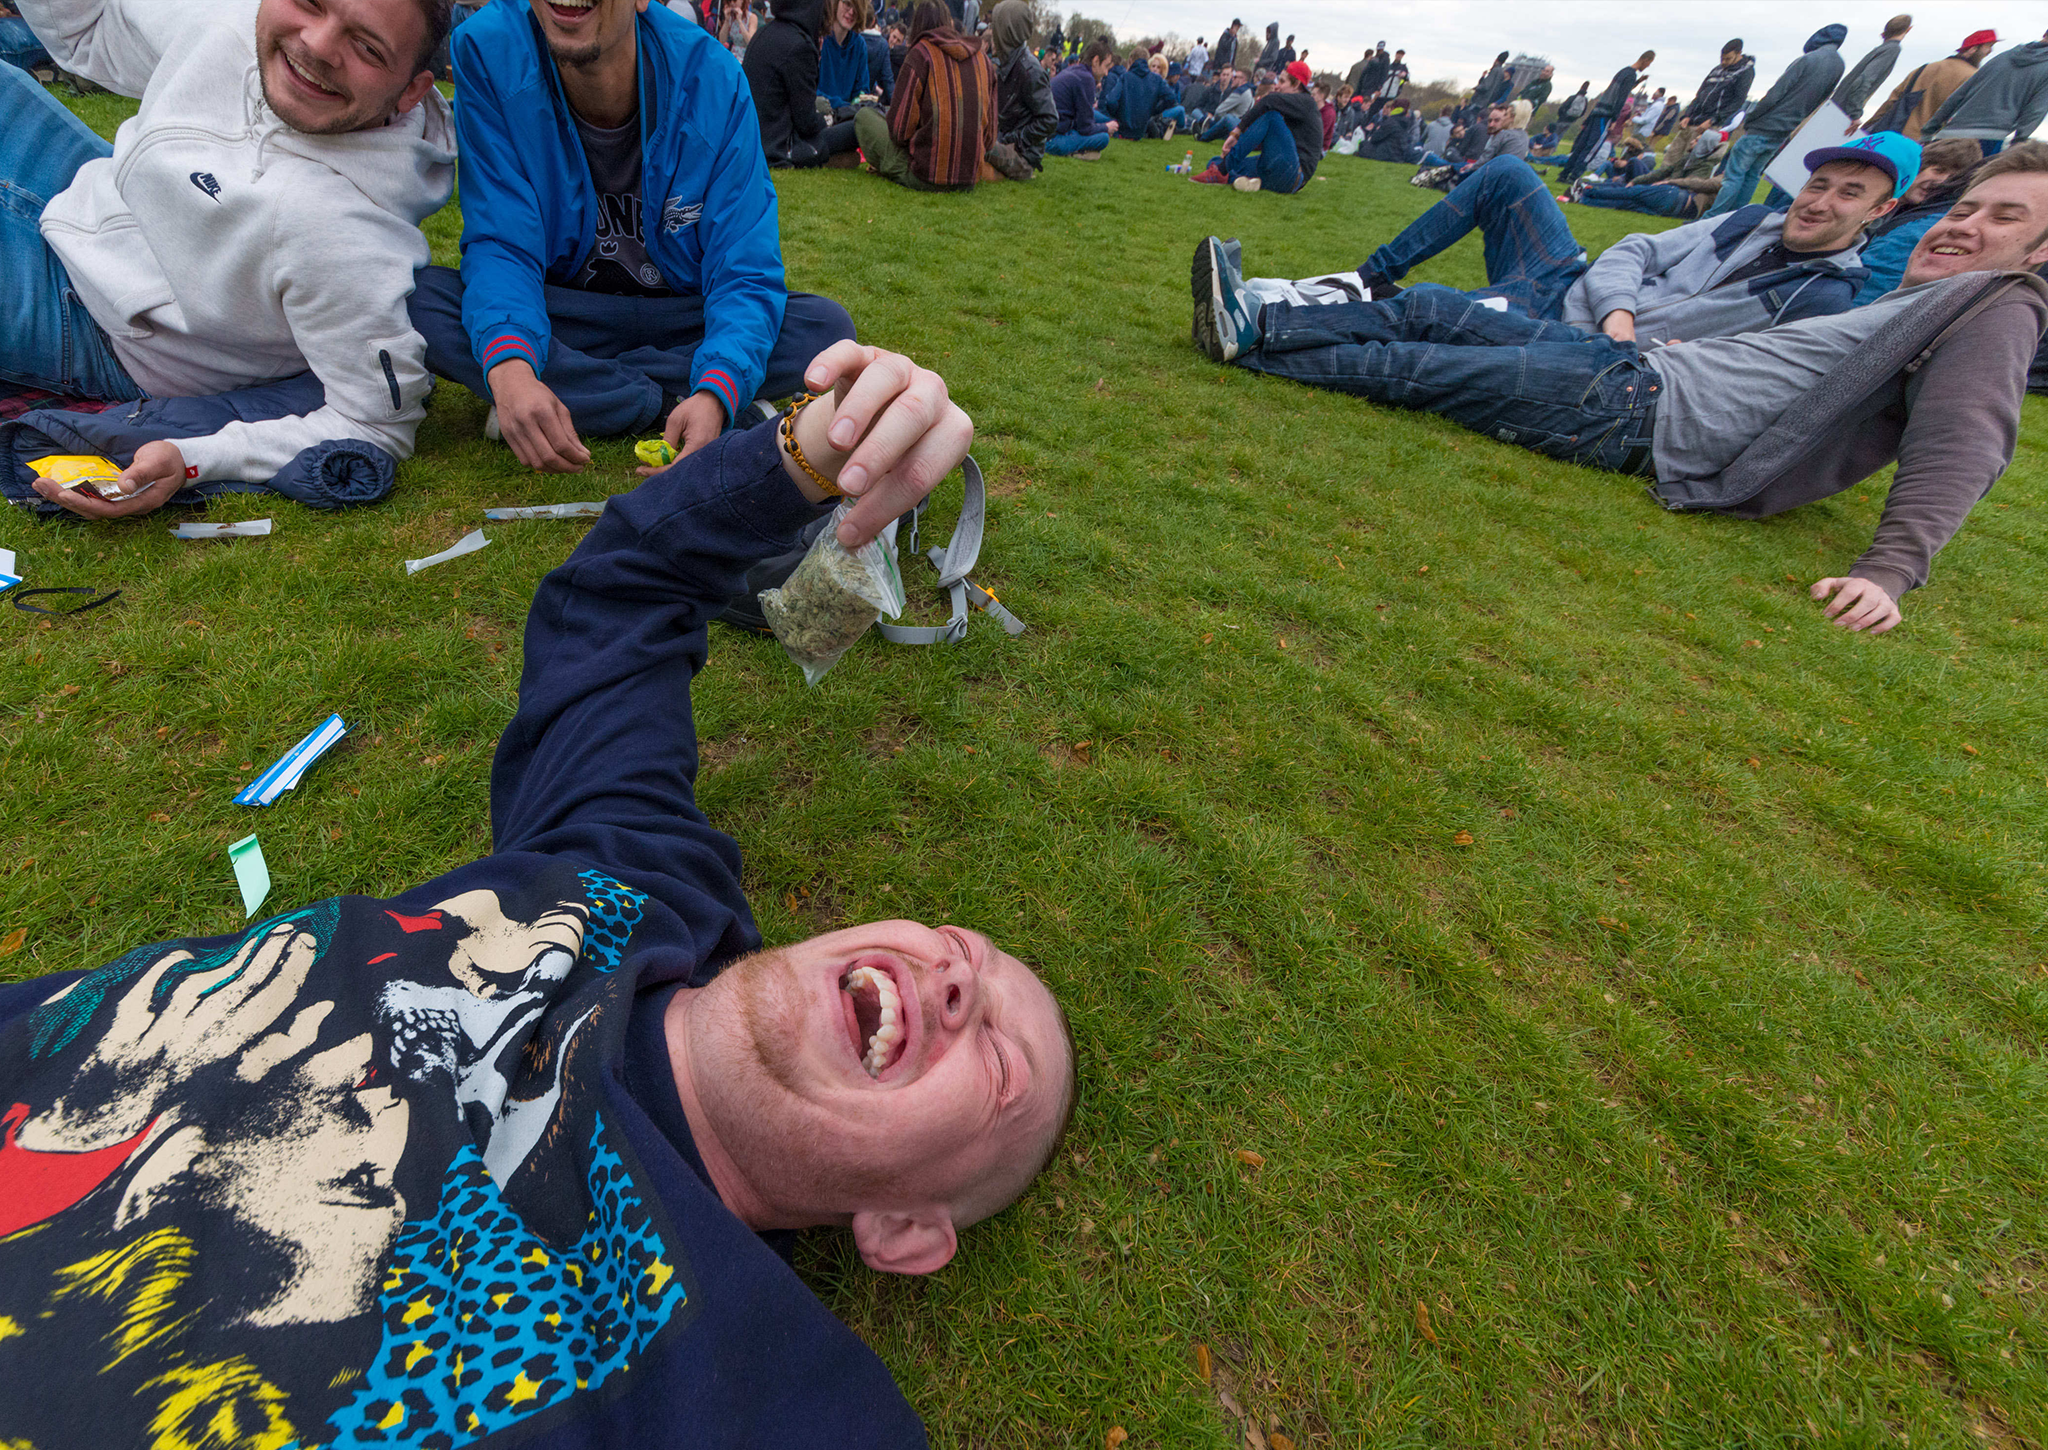 A man enjoys the "420 Day" pro-cannabis rally in Hyde Park this weekend